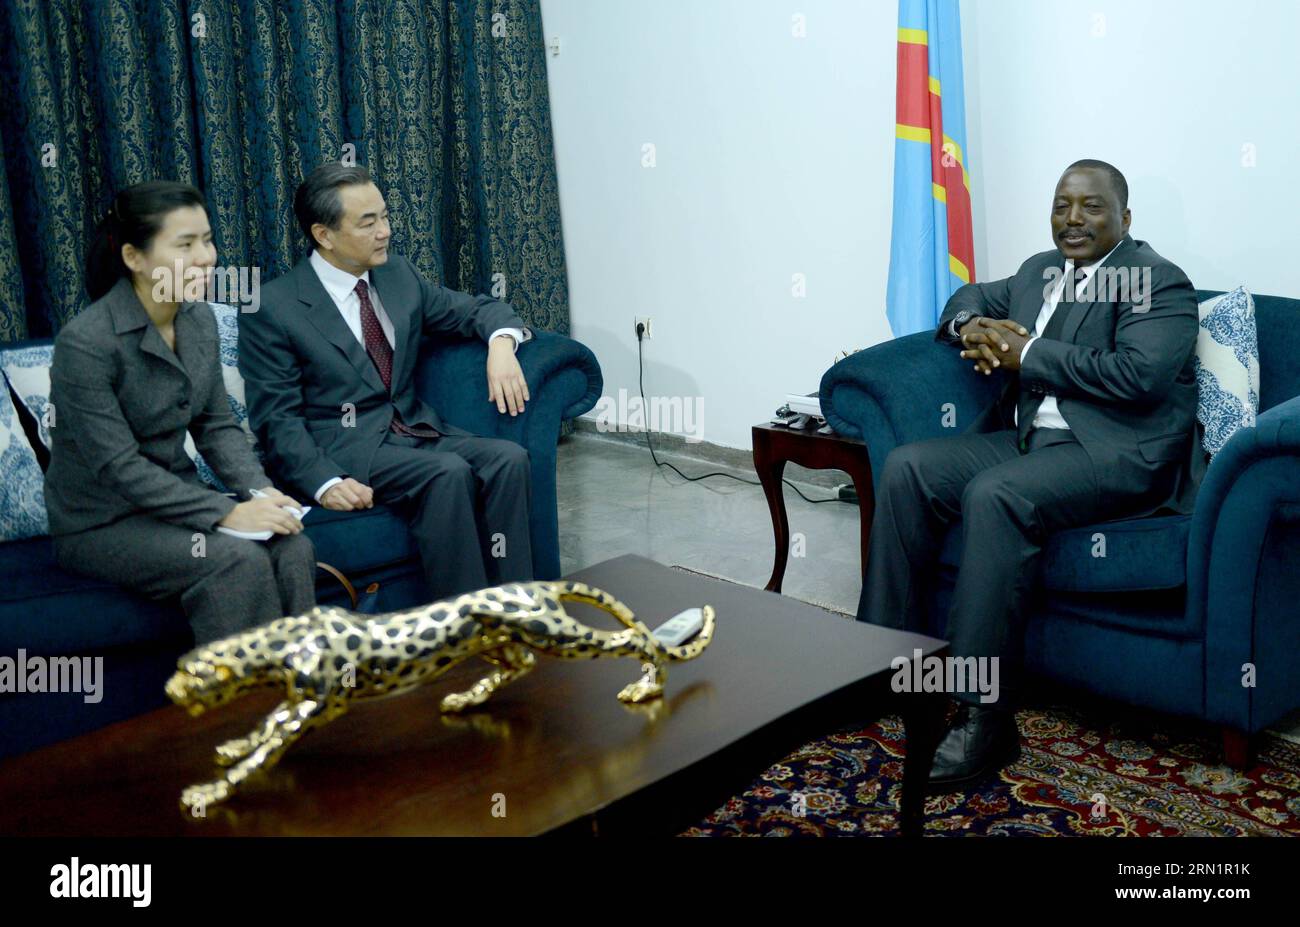 (150116) -- KINSHASA, Jan. 16, 2015 -- Chinese Foreign Minister Wang Yi (2nd L) meets with President of the Democratic Republic of the Congo Joseph Kabila (R) in Kinshasa, the Democratic Republic of Congo, on Jan. 16, 2014. ) DR CONGO-KINSHASA-CHINA-WANG YI-VISIT WangxBo PUBLICATIONxNOTxINxCHN   Kinshasa Jan 16 2015 Chinese Foreign Ministers Wang Yi 2nd l Meets With President of The Democratic Republic of The Congo Joseph Kabila r in Kinshasa The Democratic Republic of Congo ON Jan 16 2014 Dr Congo Kinshasa China Wang Yi Visit  PUBLICATIONxNOTxINxCHN Stock Photo